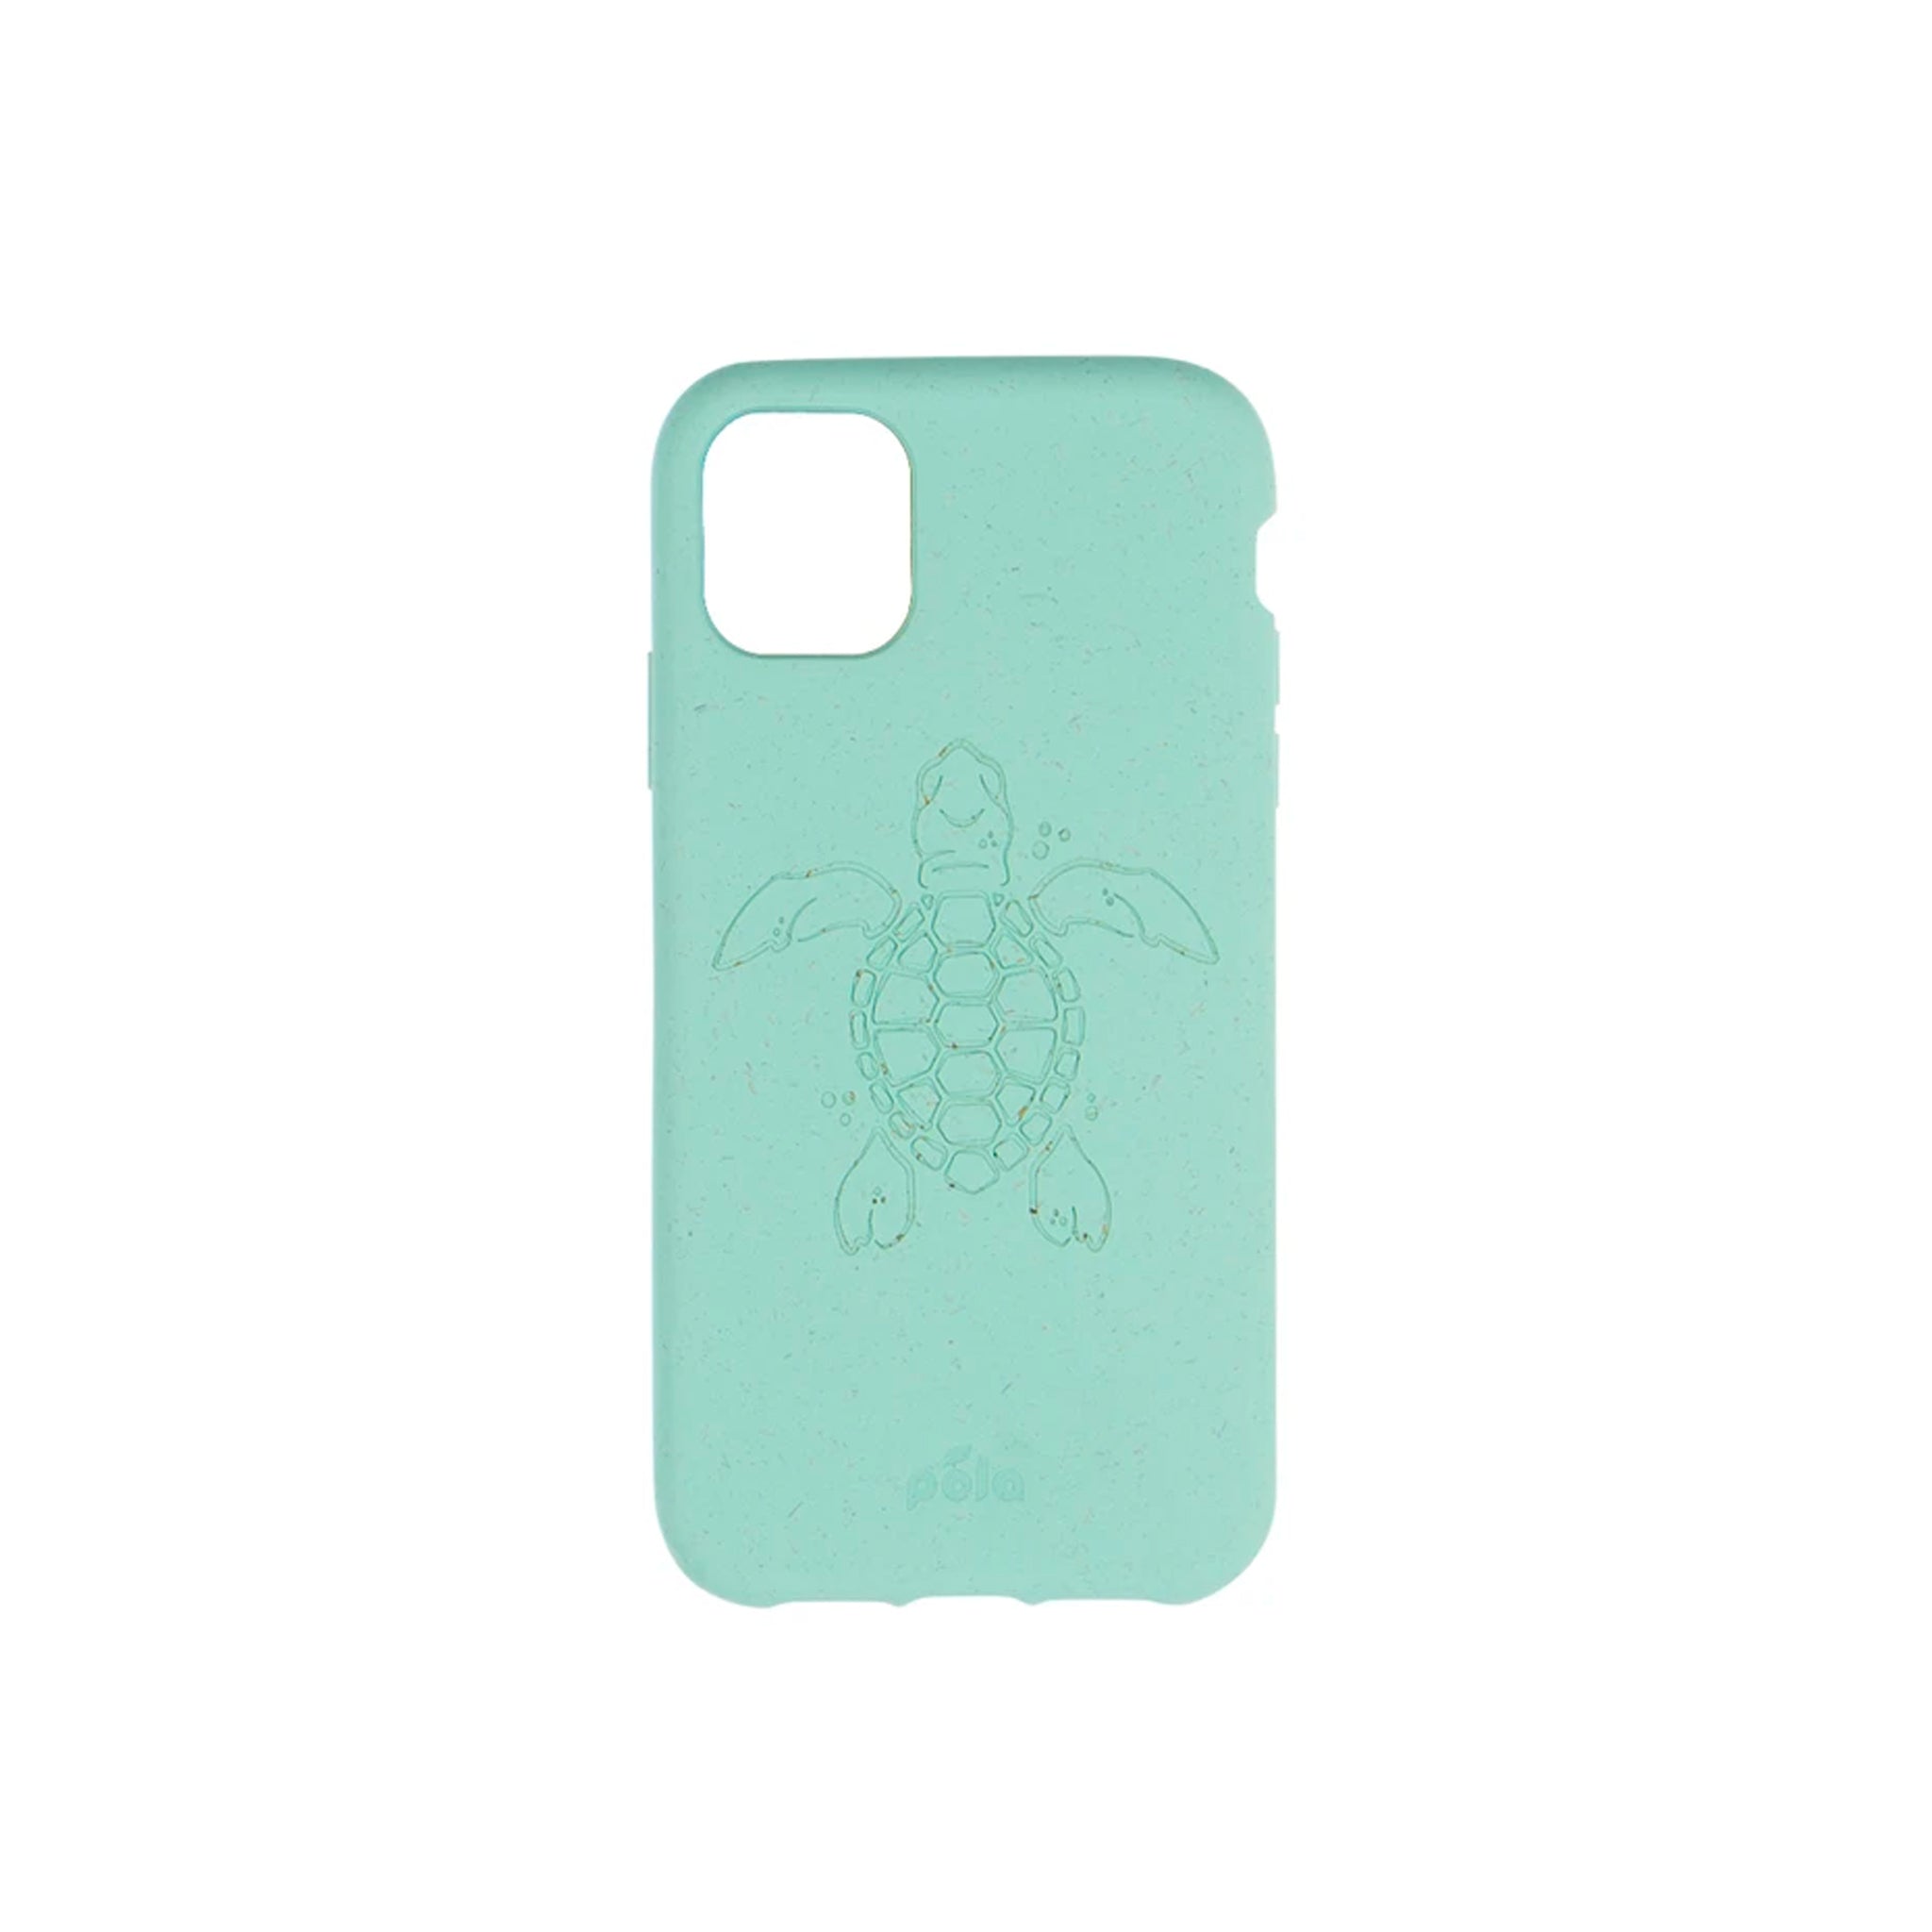 Pela - Eco Friendly Case For Apple Iphone 12 / 12 Pro - Ocean Turquoise Turtle Edition